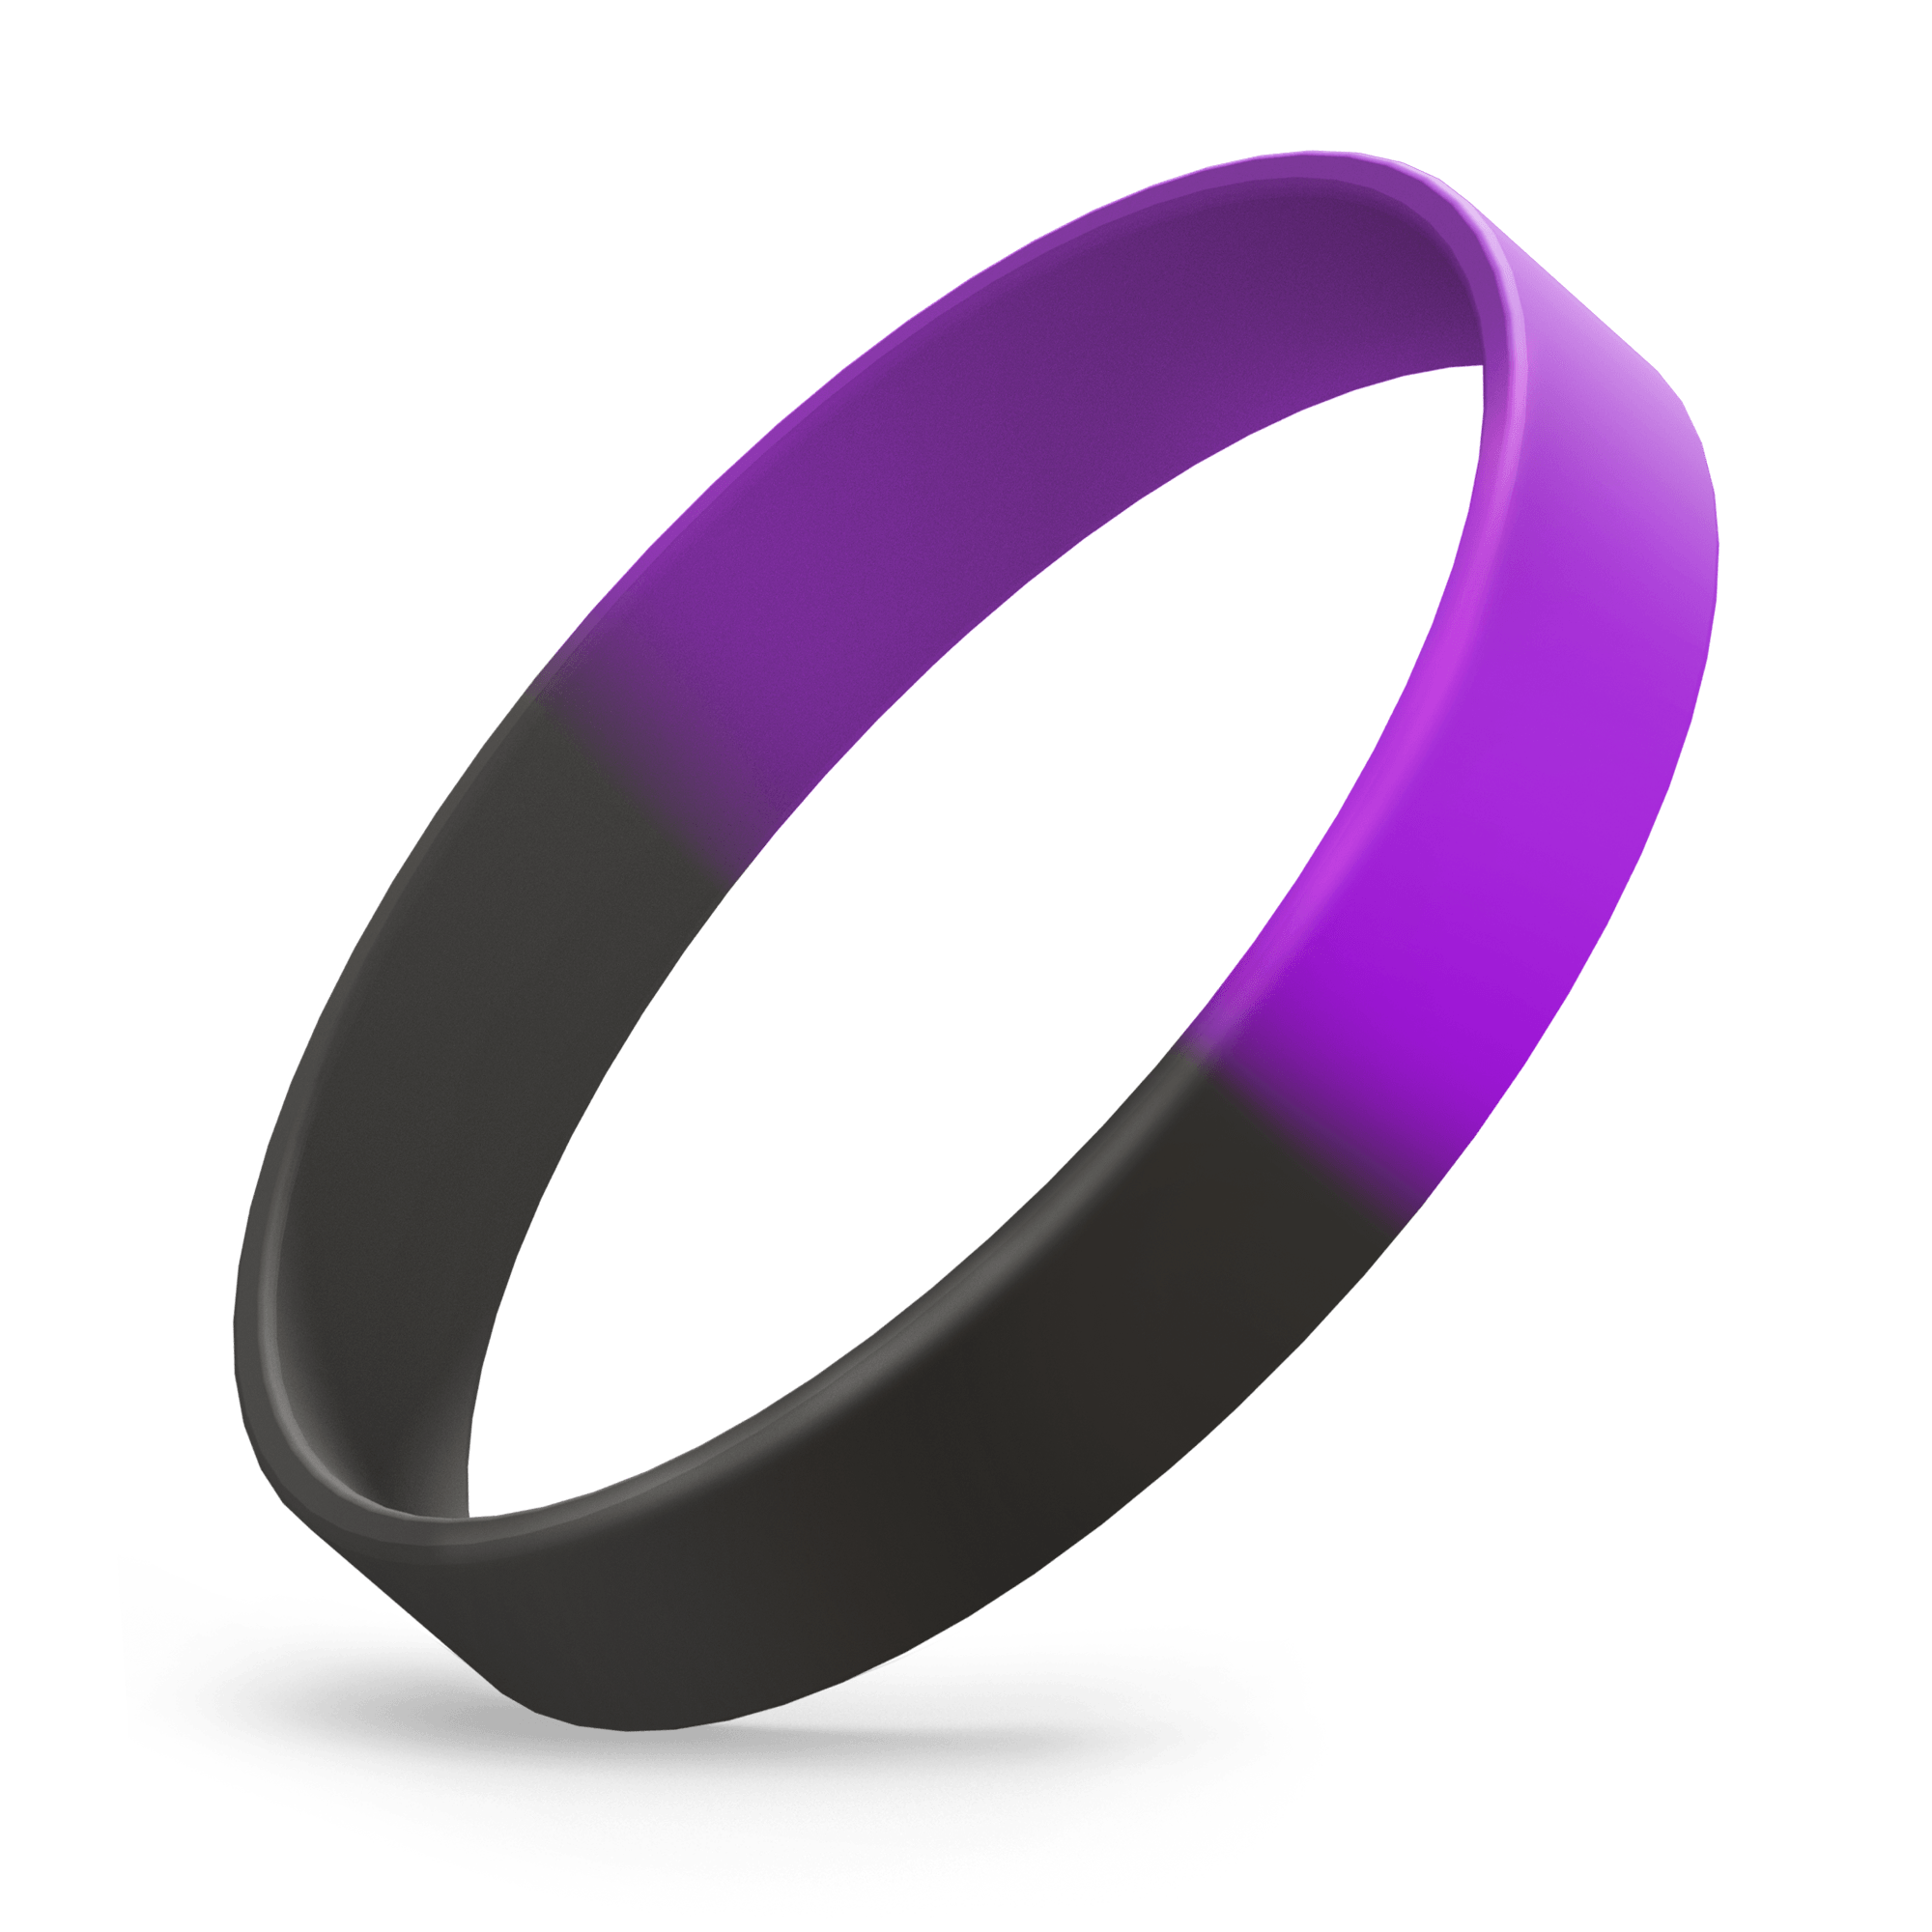 Custom Ink Injected (Black / Purple Segmented) Silicone Wristbands - Rubber Bracelets by Wristband Resources